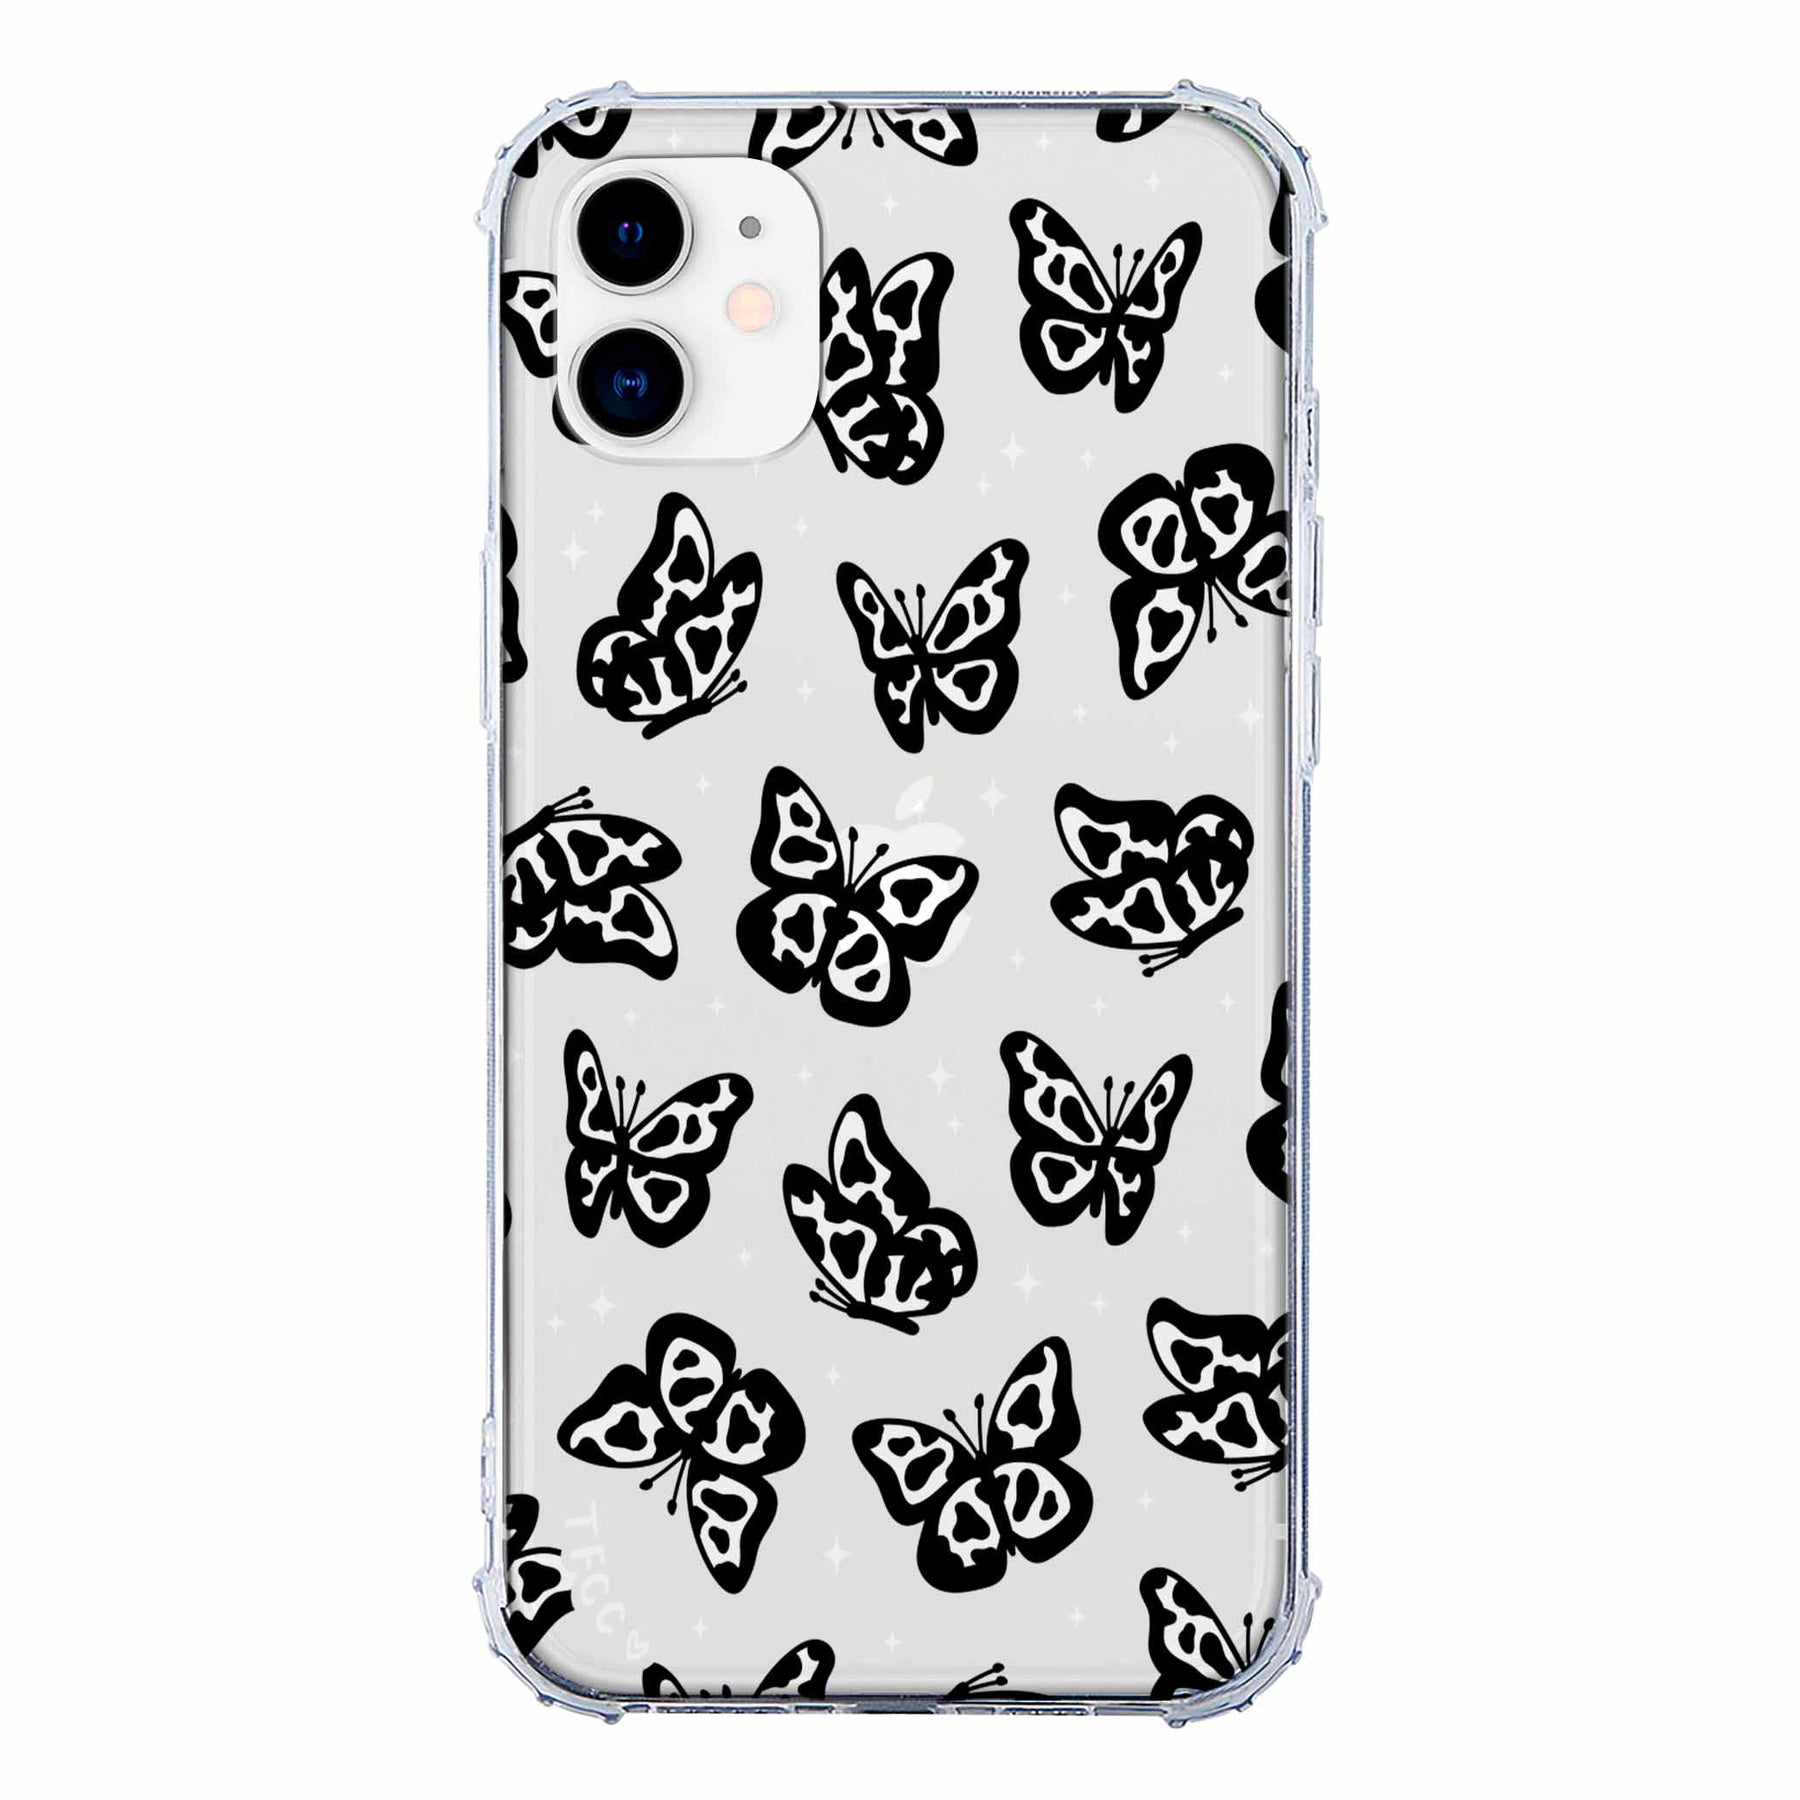 COW PRINT BUTTERFLY CLEAR CASE - thefonecasecompany